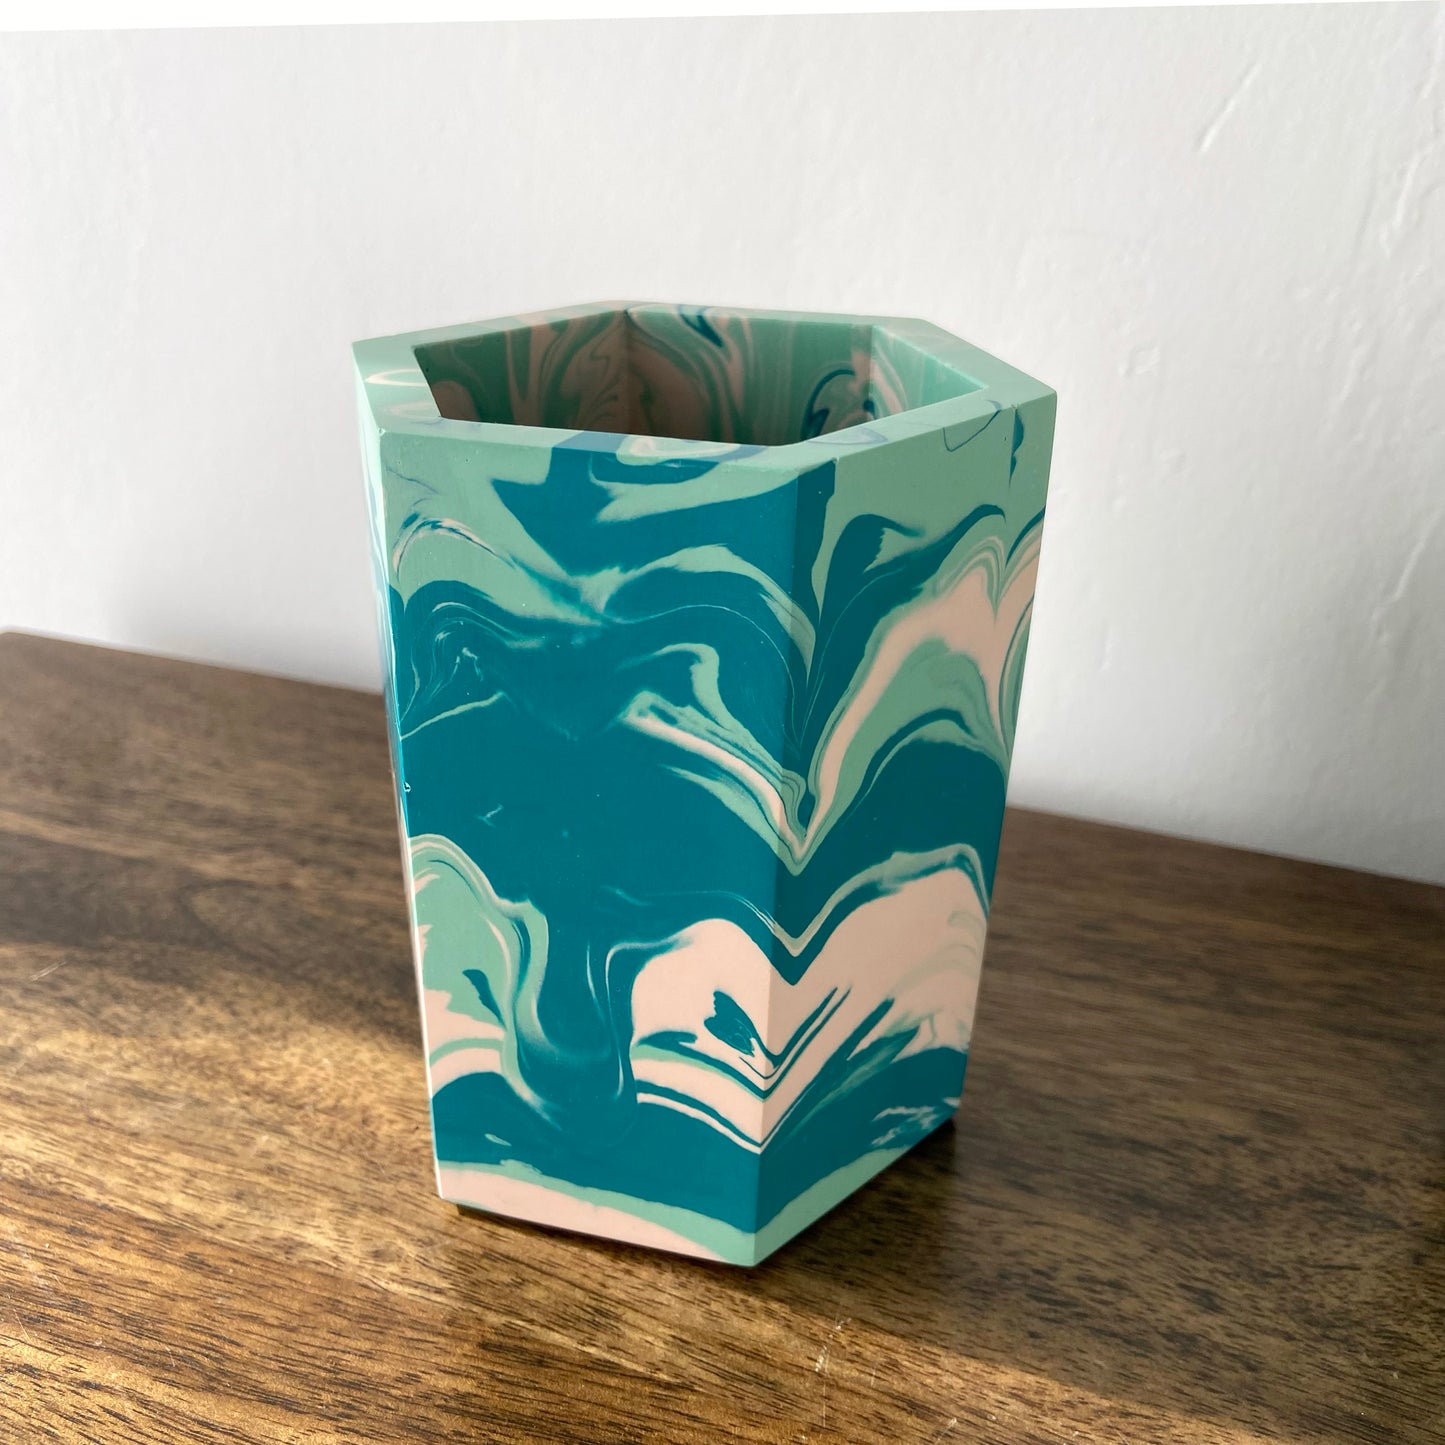 Hexagon pen pot / dried flower vase in marbled teal + pink